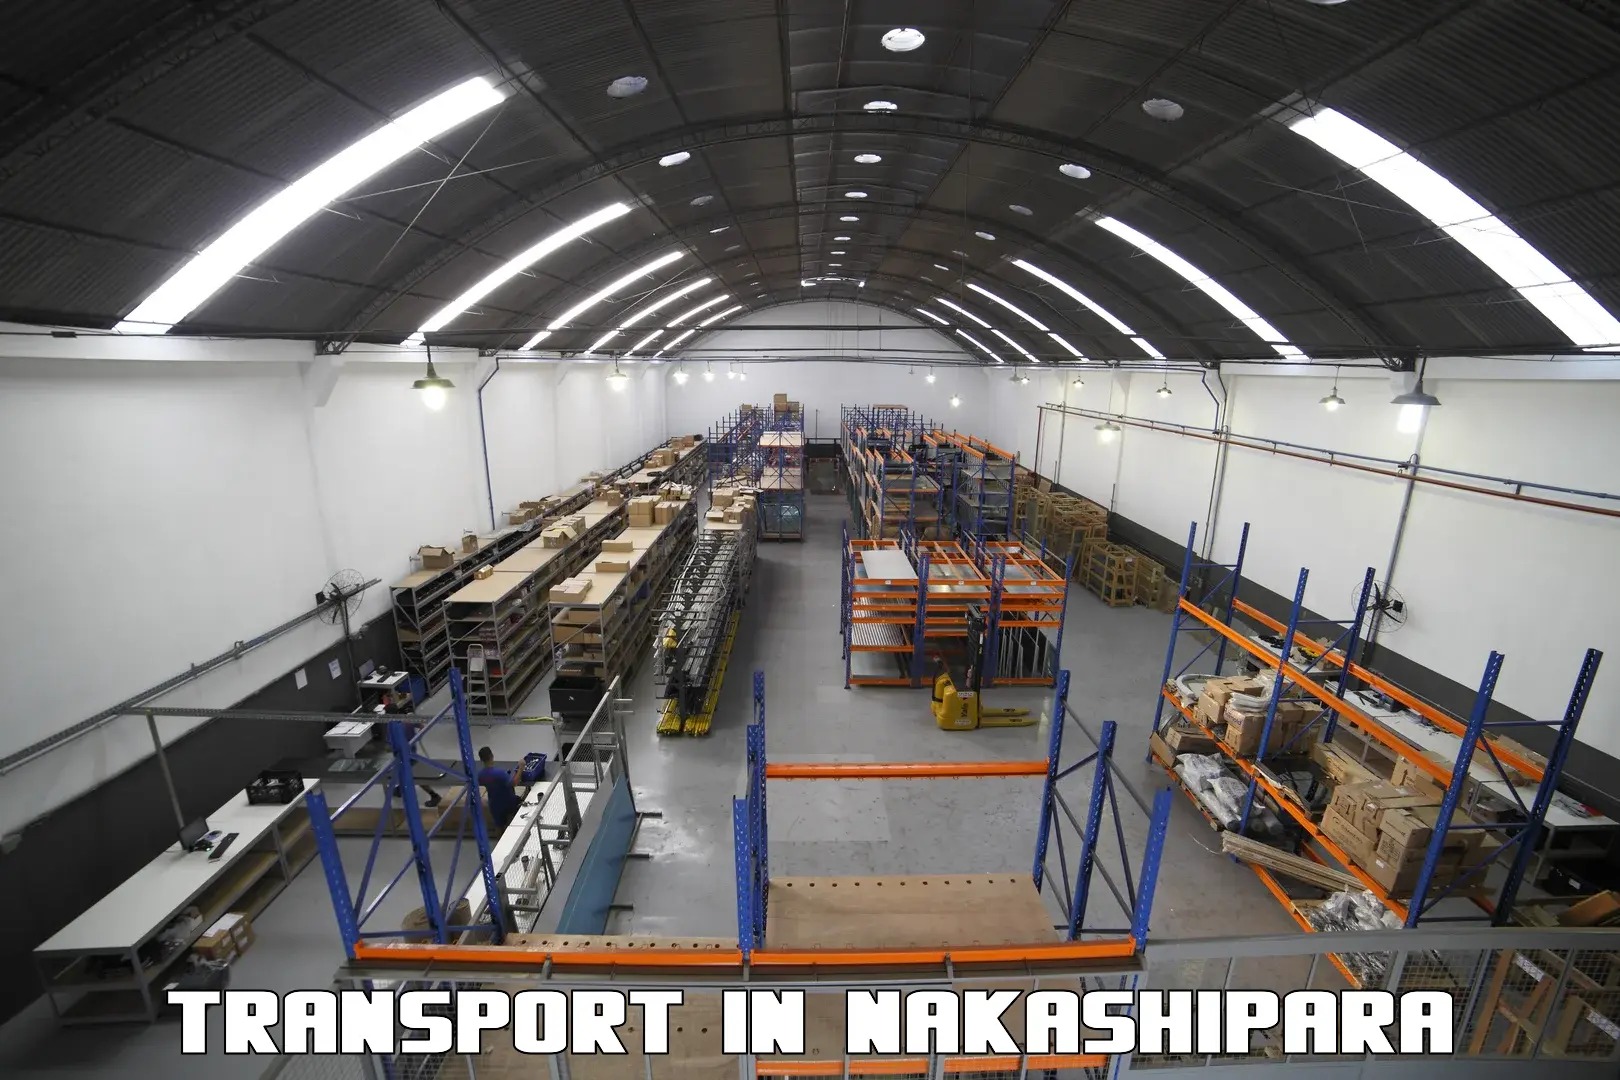 Air freight transport services in Nakashipara